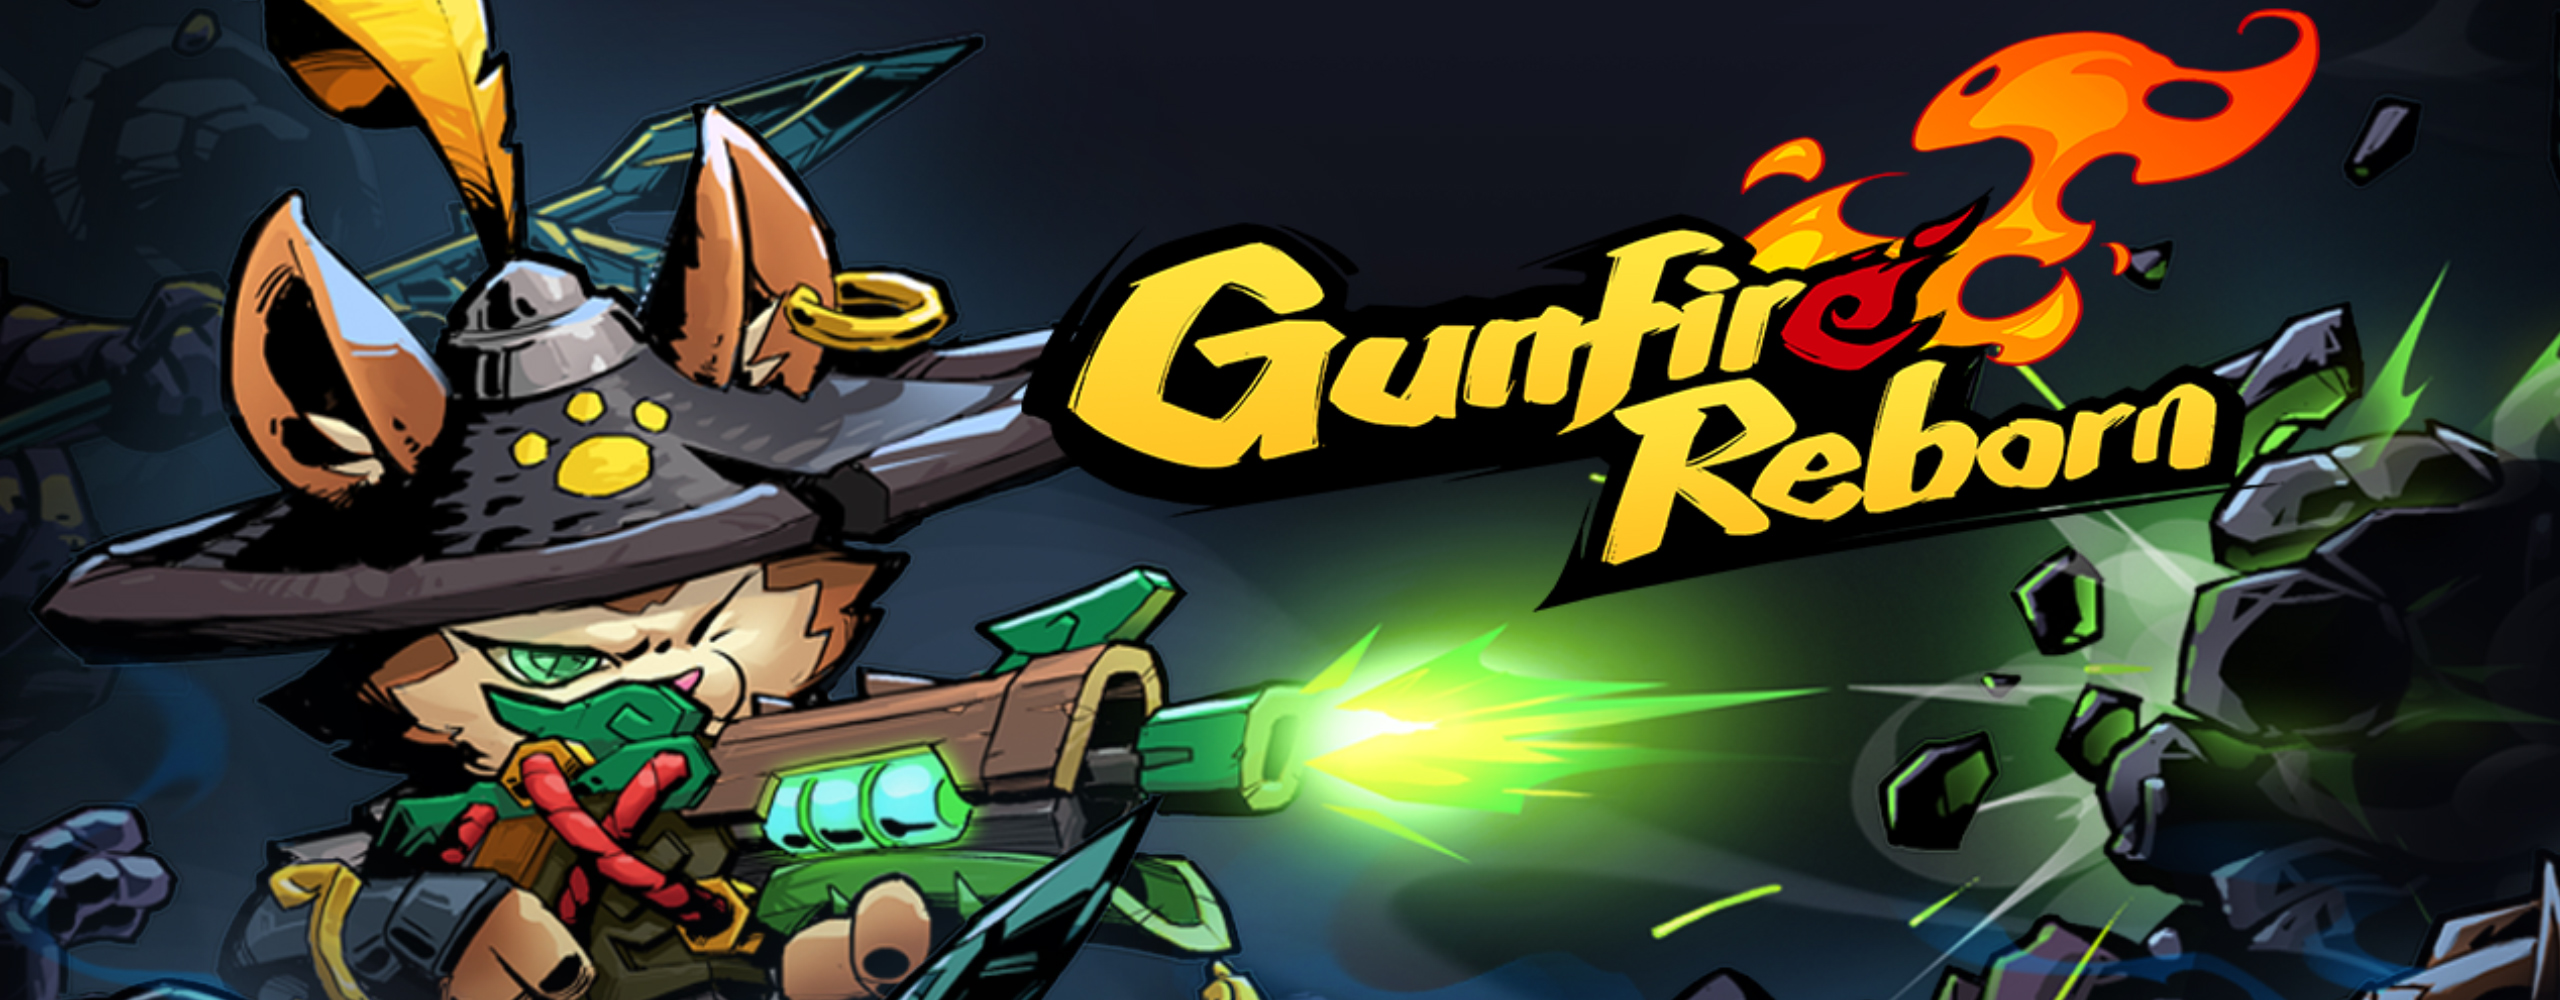 Gunfire Reborn Is Coming To Consoles!